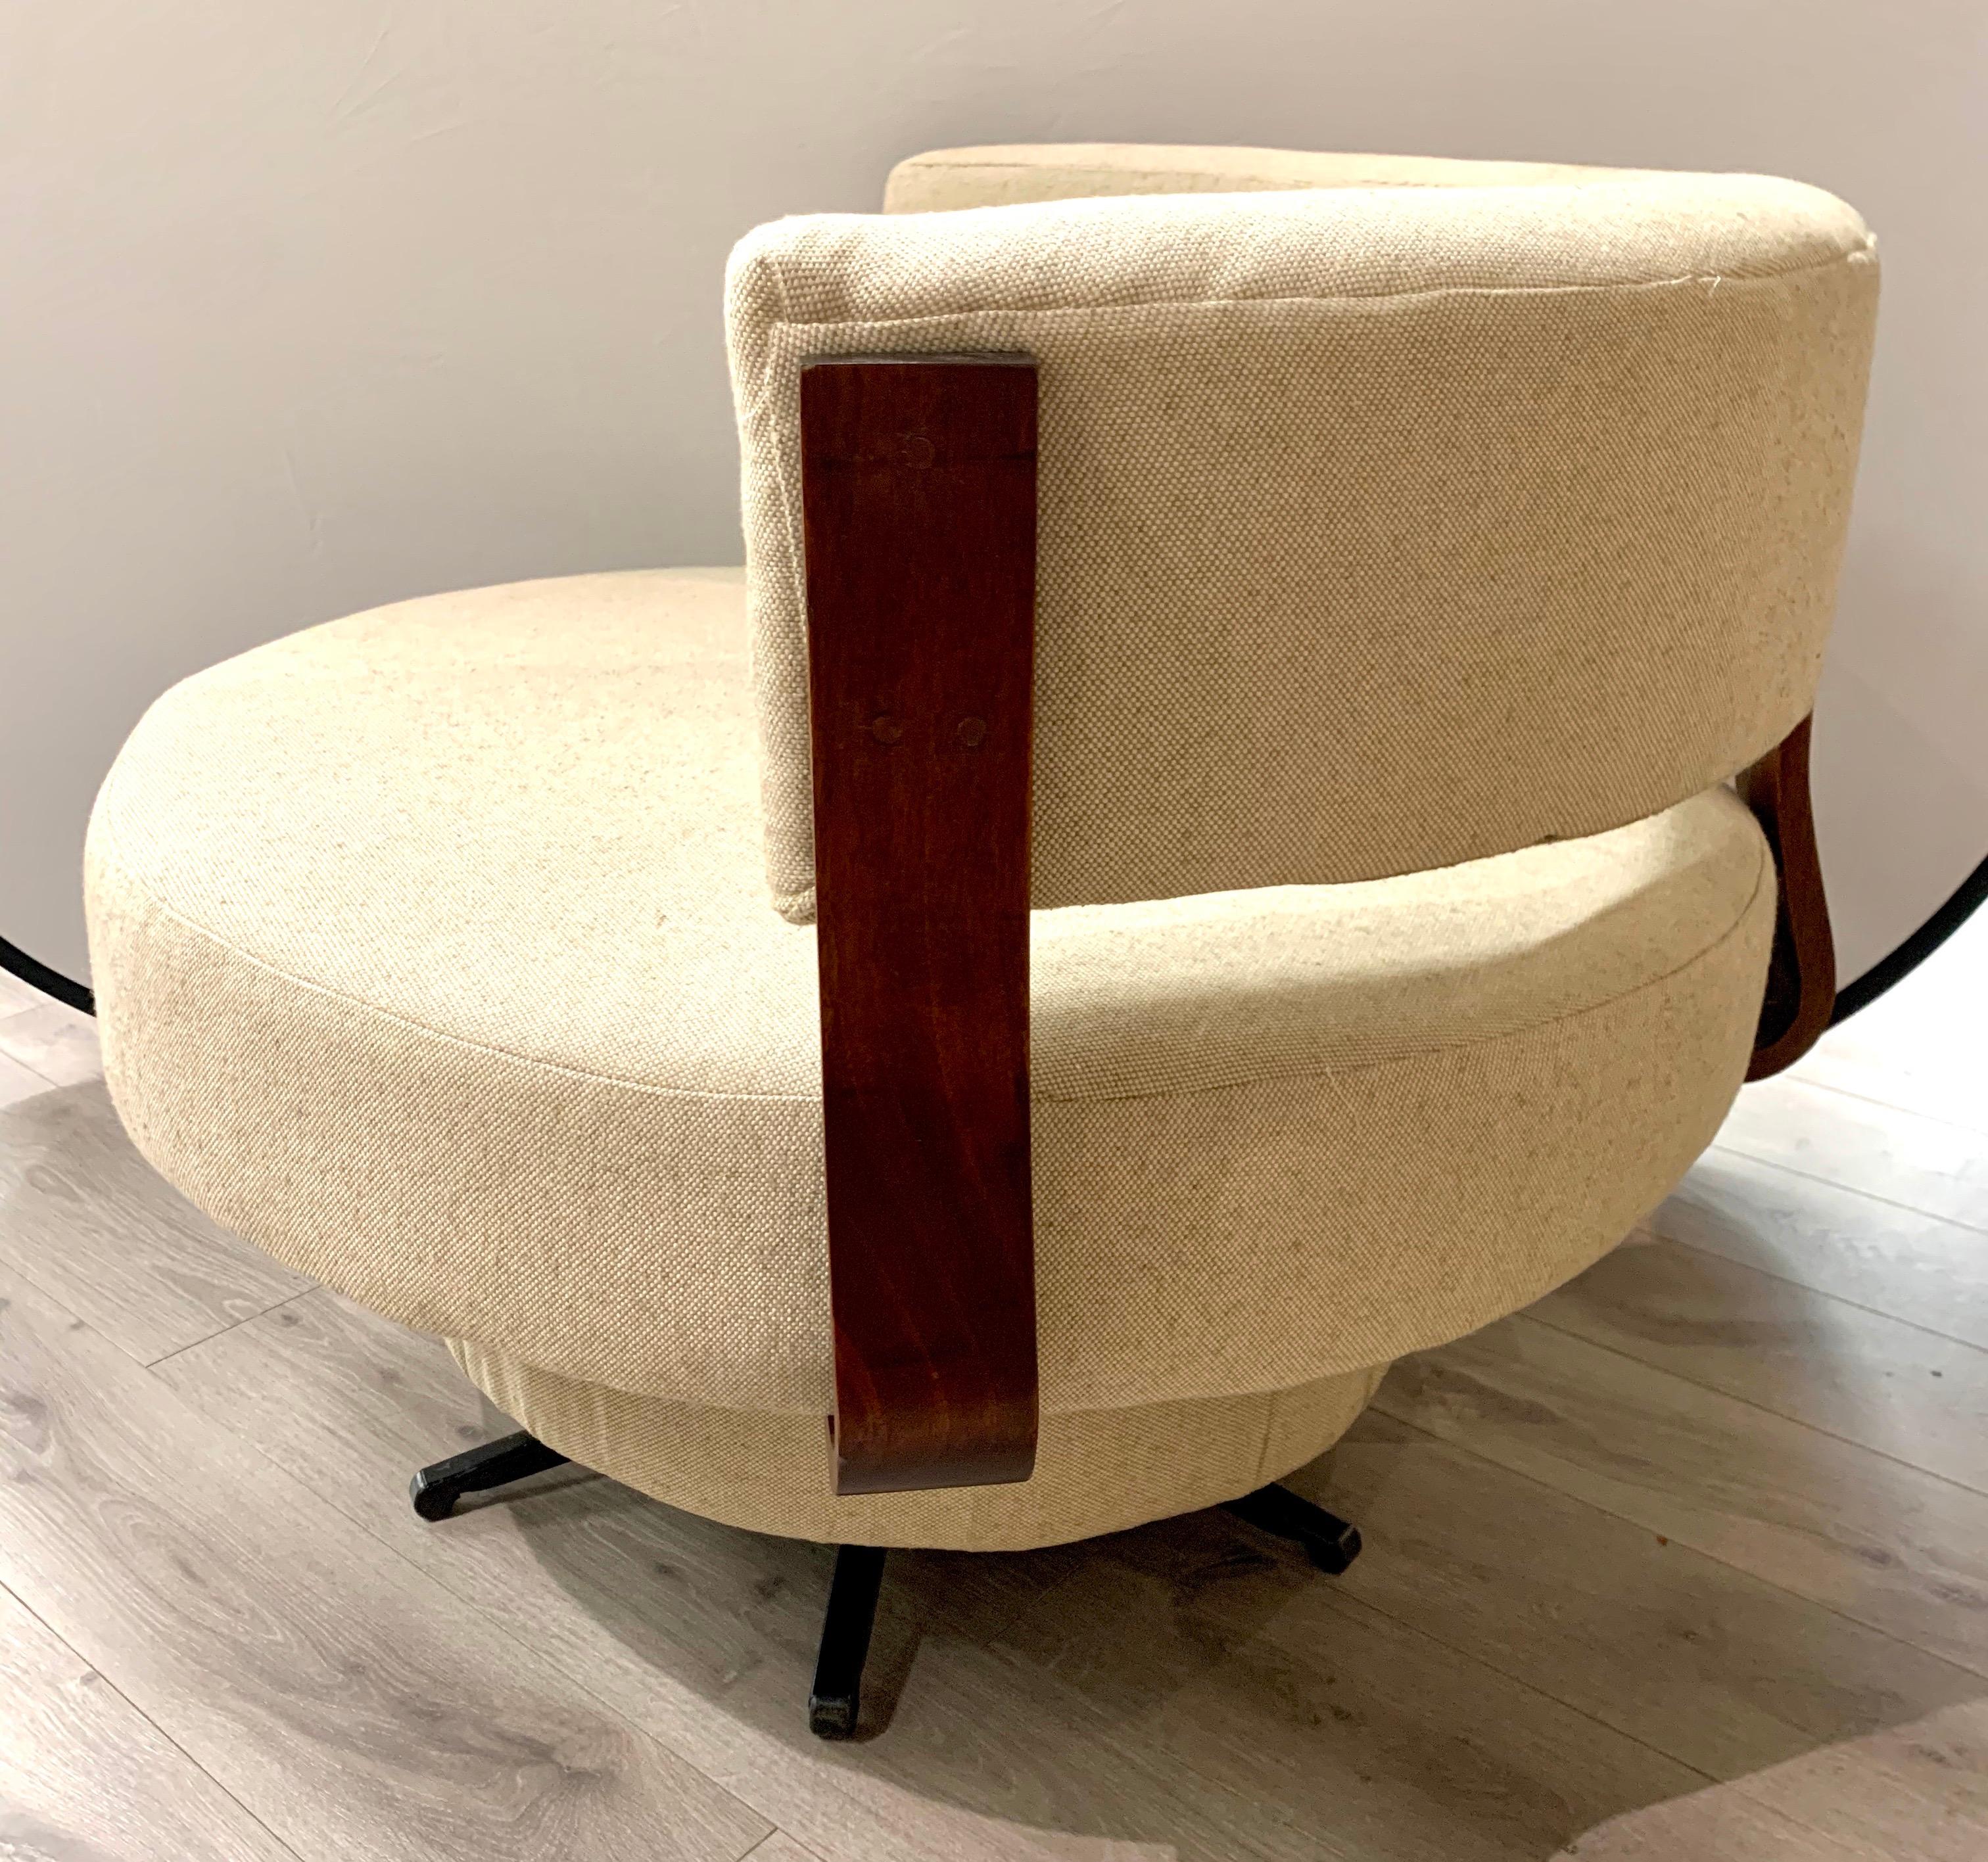 Elegant and large Mid-Century Modern round swivel chair with new Herman Miller oatmeal fabric.
Please note we have a pair of these but are selling as a single in this particular auction. Important to note
That the chair is on the larger side - see